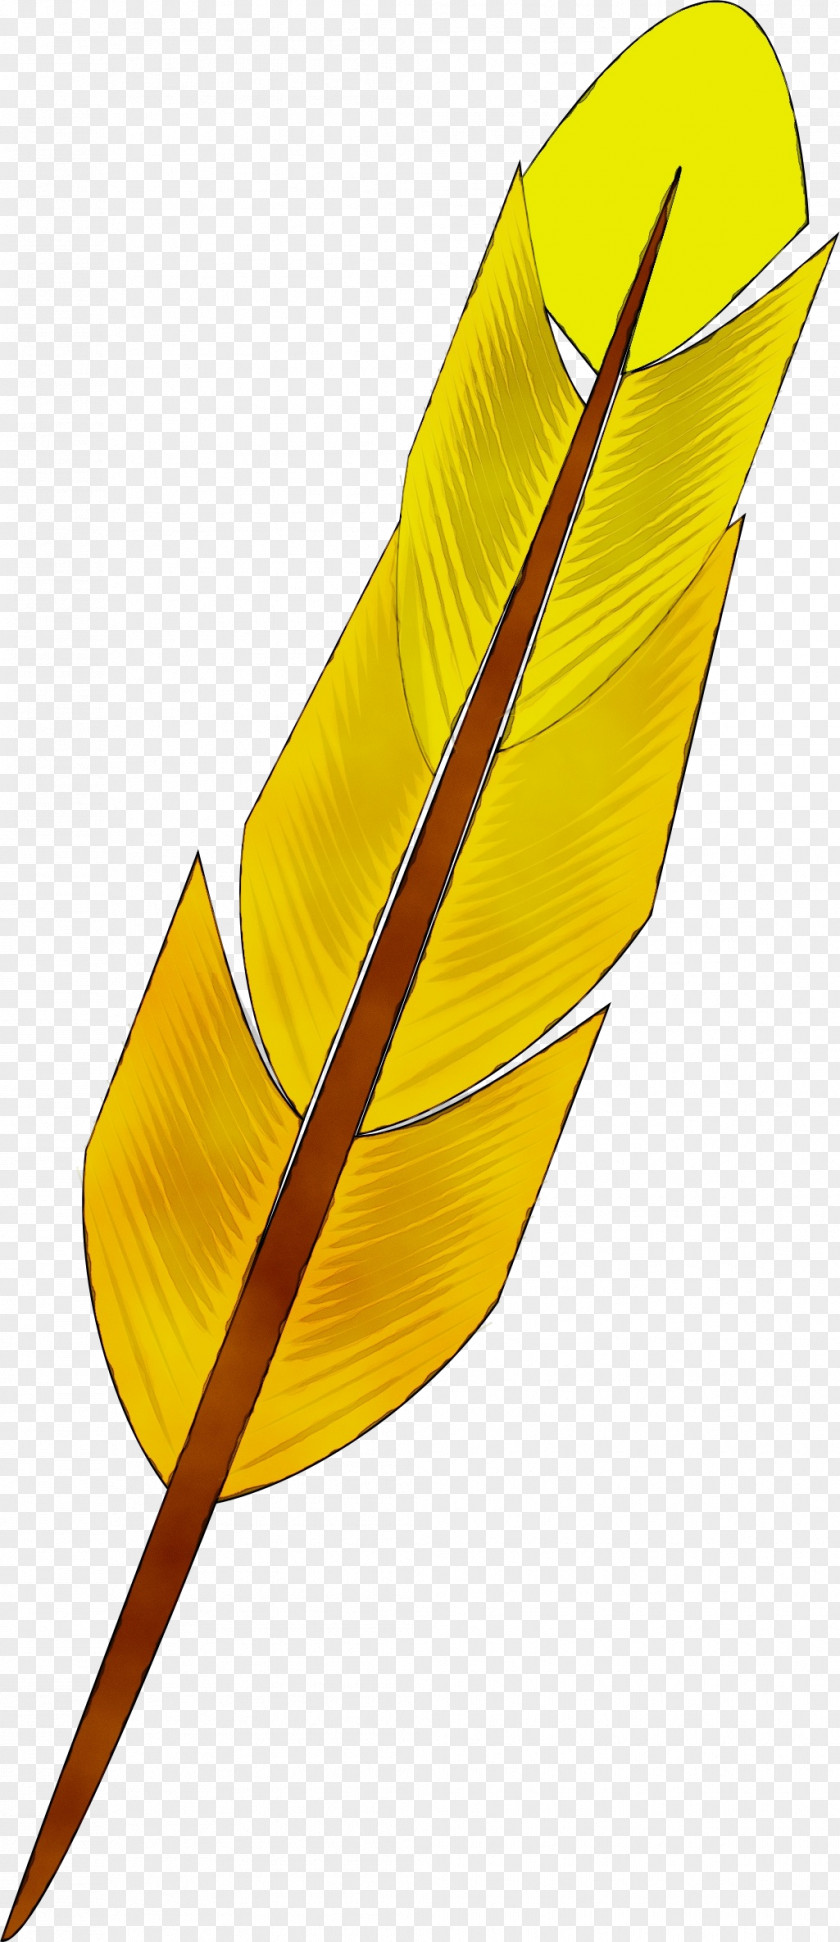 Writing Implement Feather Leaf Arrow PNG